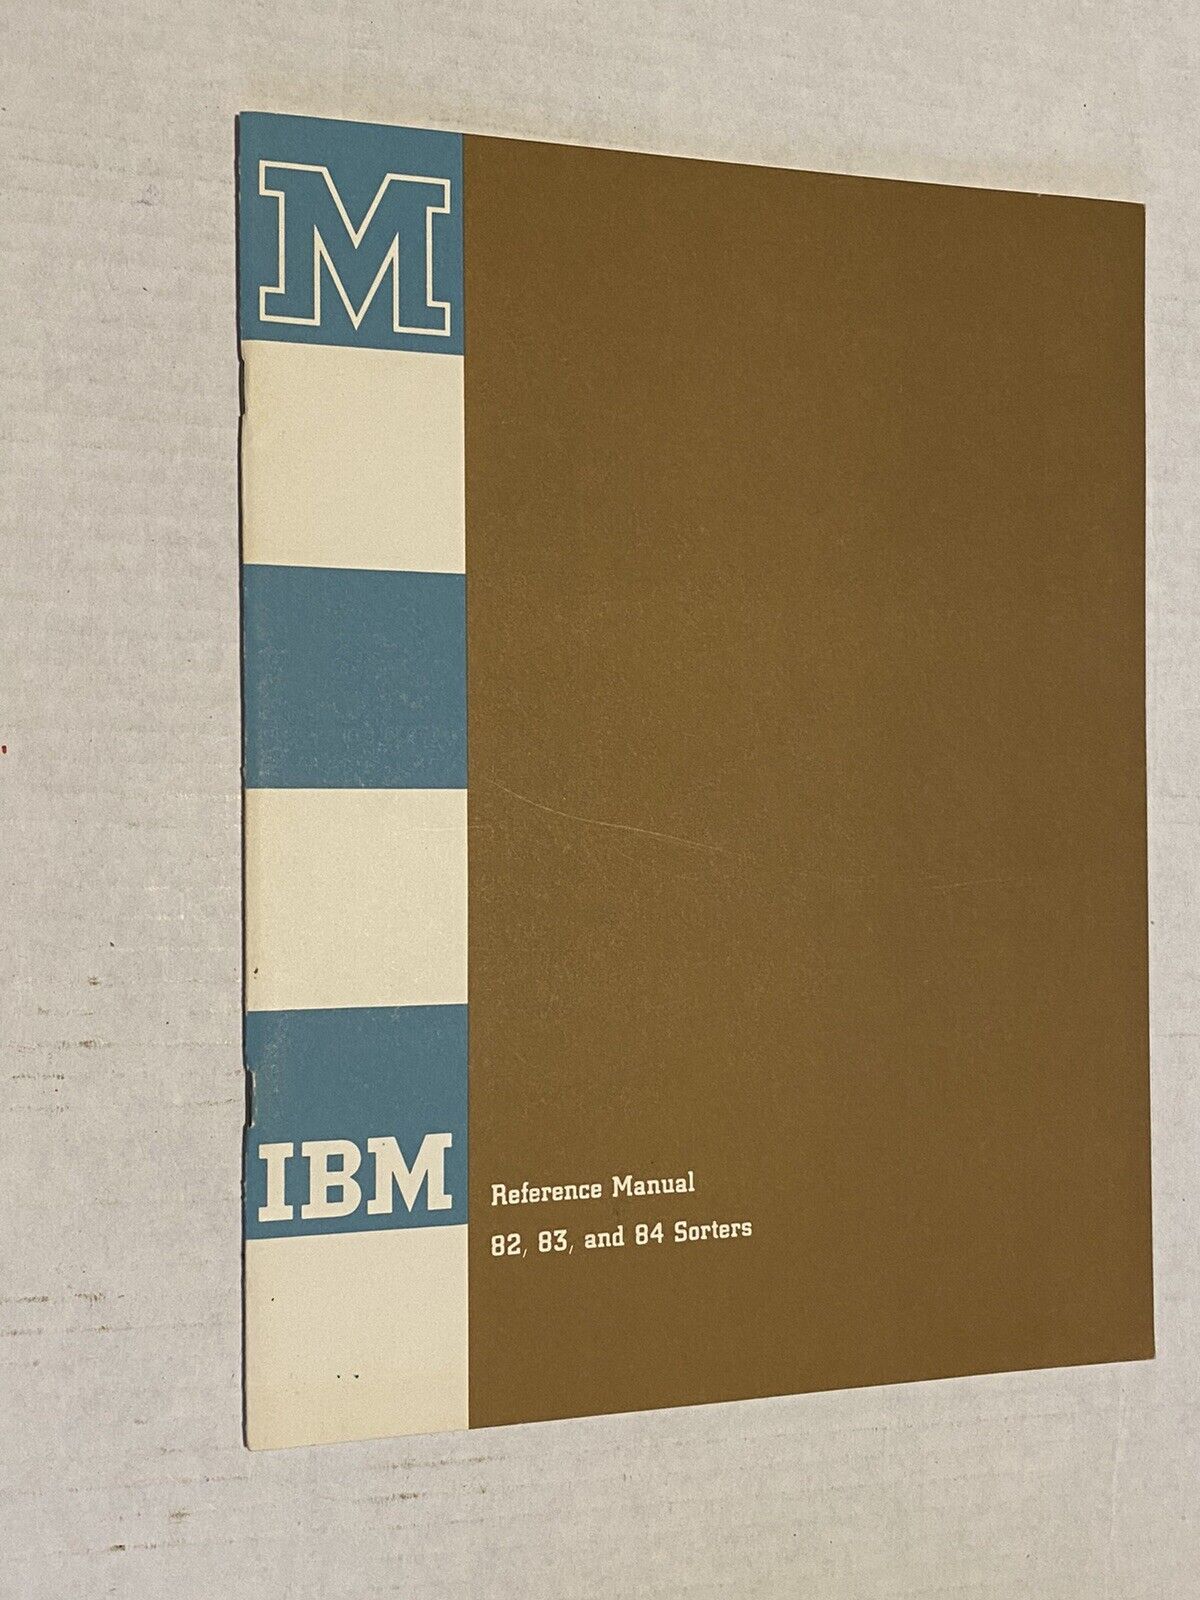 Vintage IBM Reference Manual 82, 83, And 84 Sorters March 1961